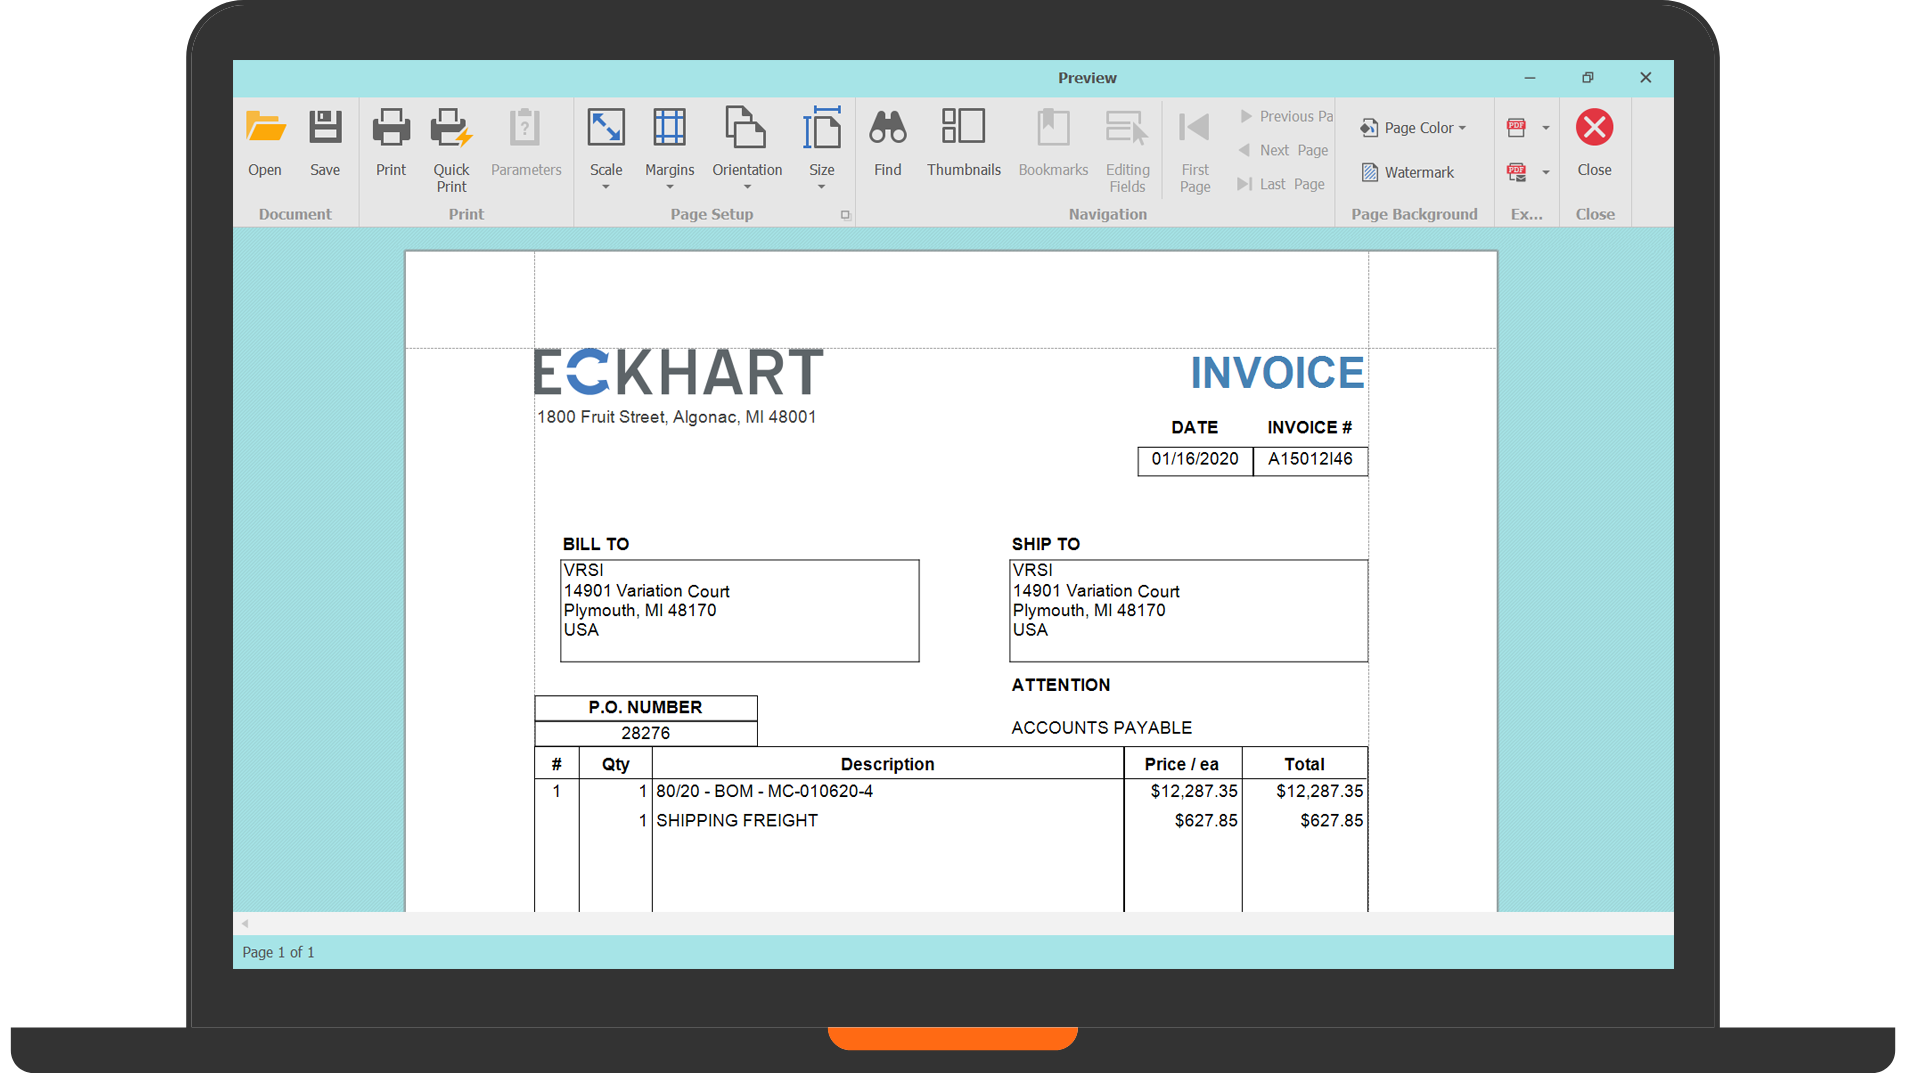 Easily create packing slips and invoices